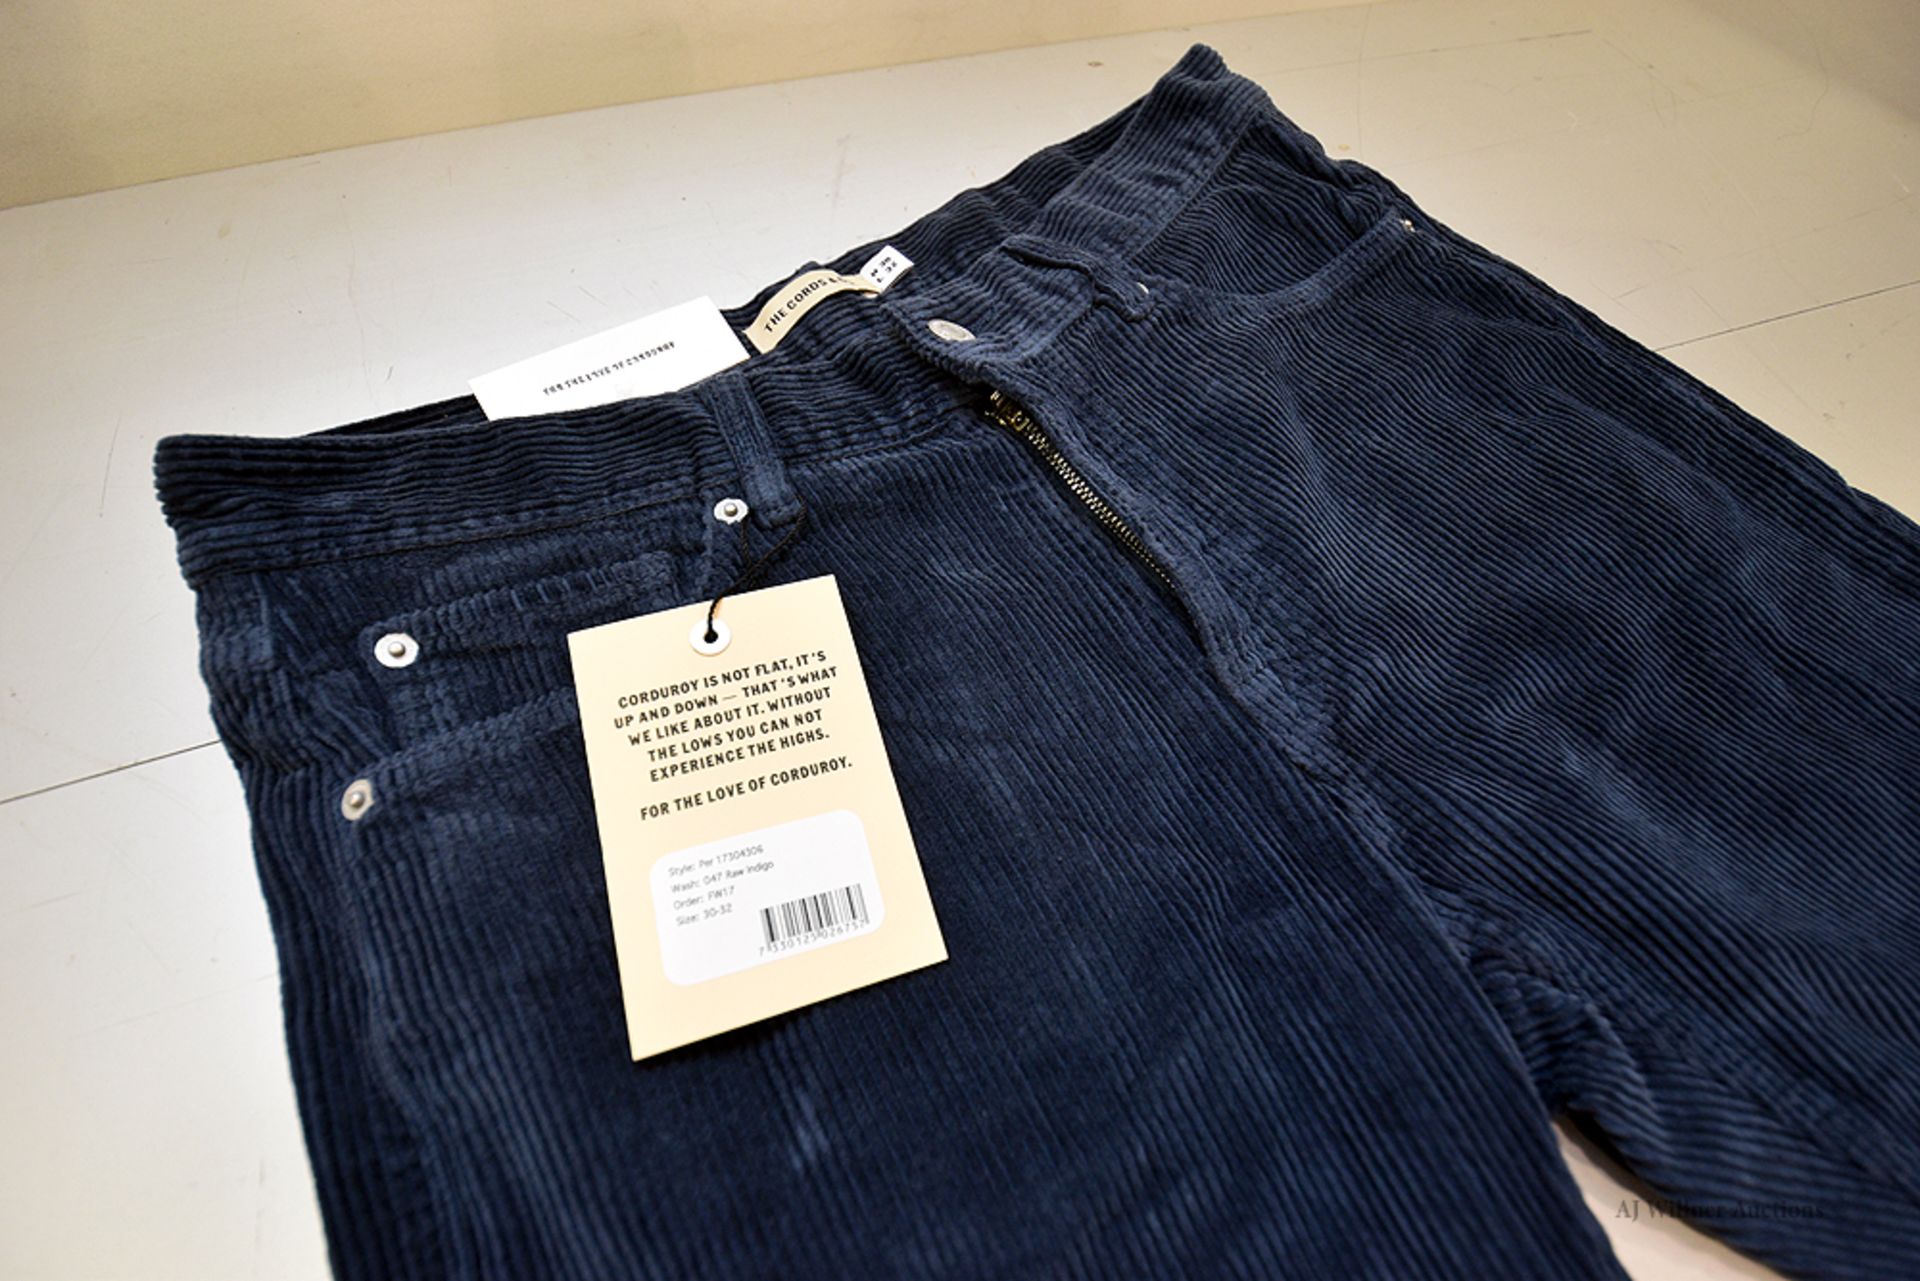 THE CORDS & CO. "PER" MEN'S/HIGH-WAIST/ STRAIGHT FIT/ NARROW LEG MSRP $160 - Image 4 of 4